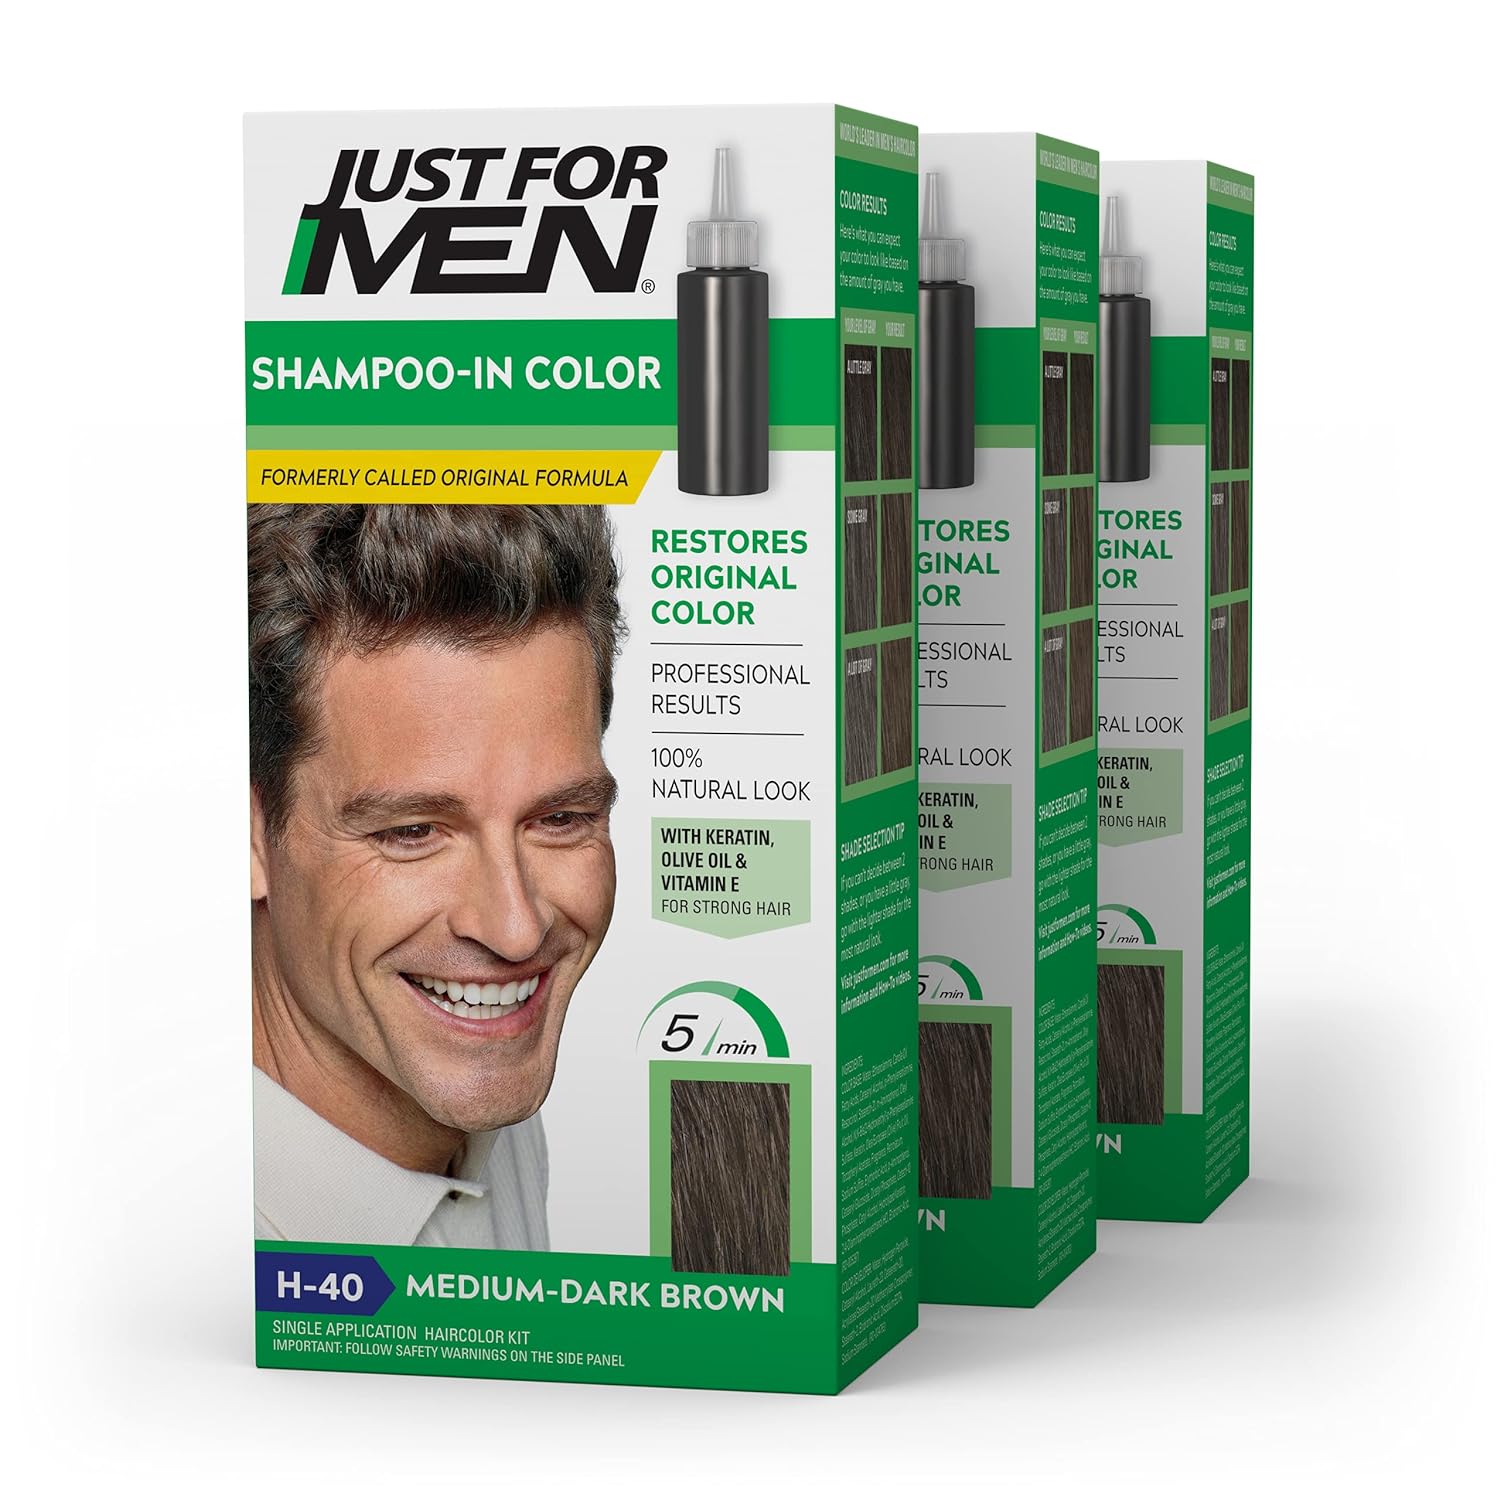 Just For Men Shampoo In Color Gray Hair Coloring for Me